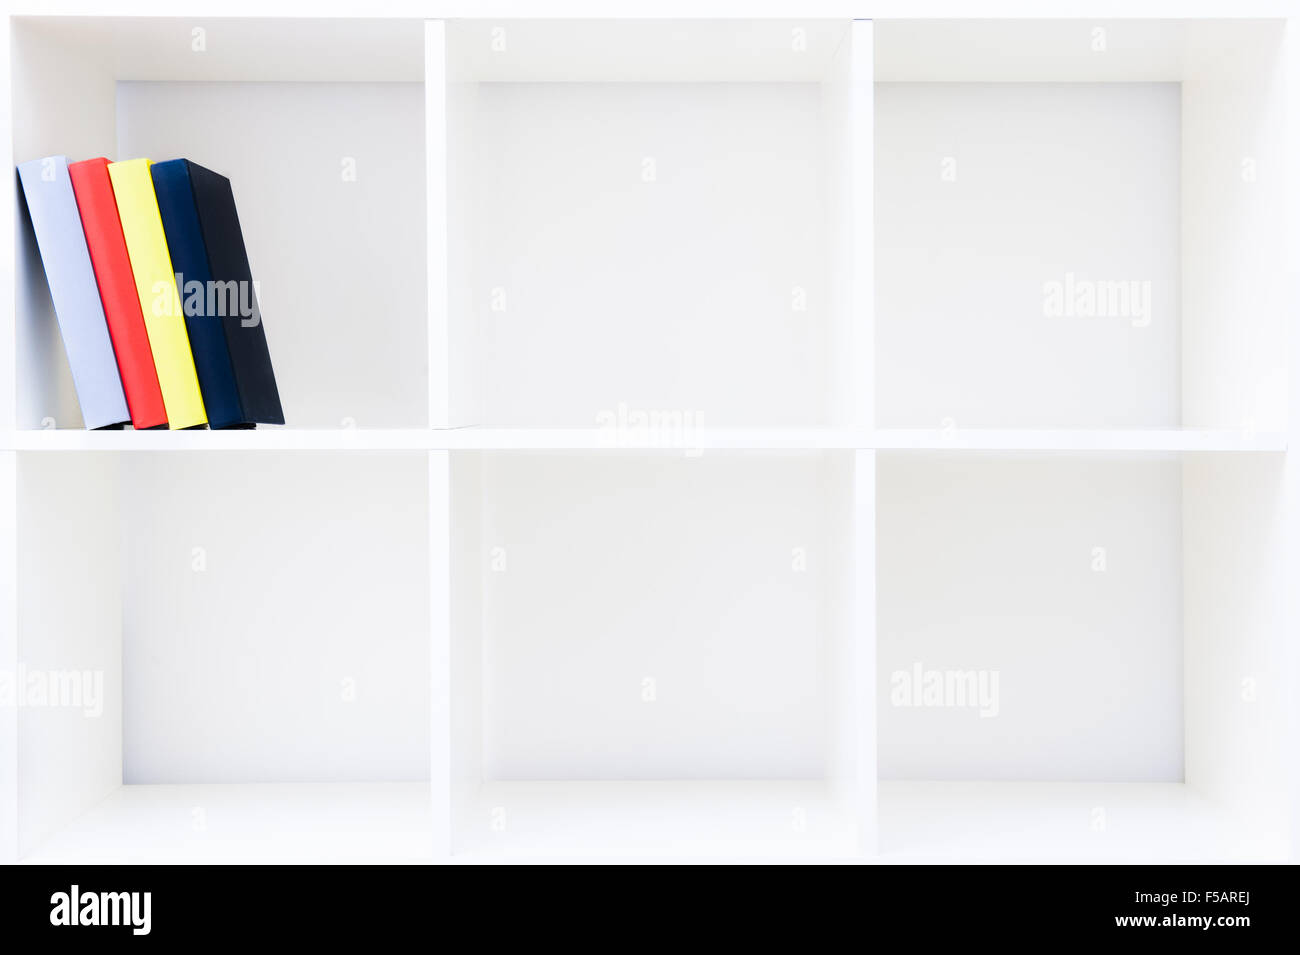 Colored books red yellow and blue on cubical white bookshelf with empty copy space Stock Photo